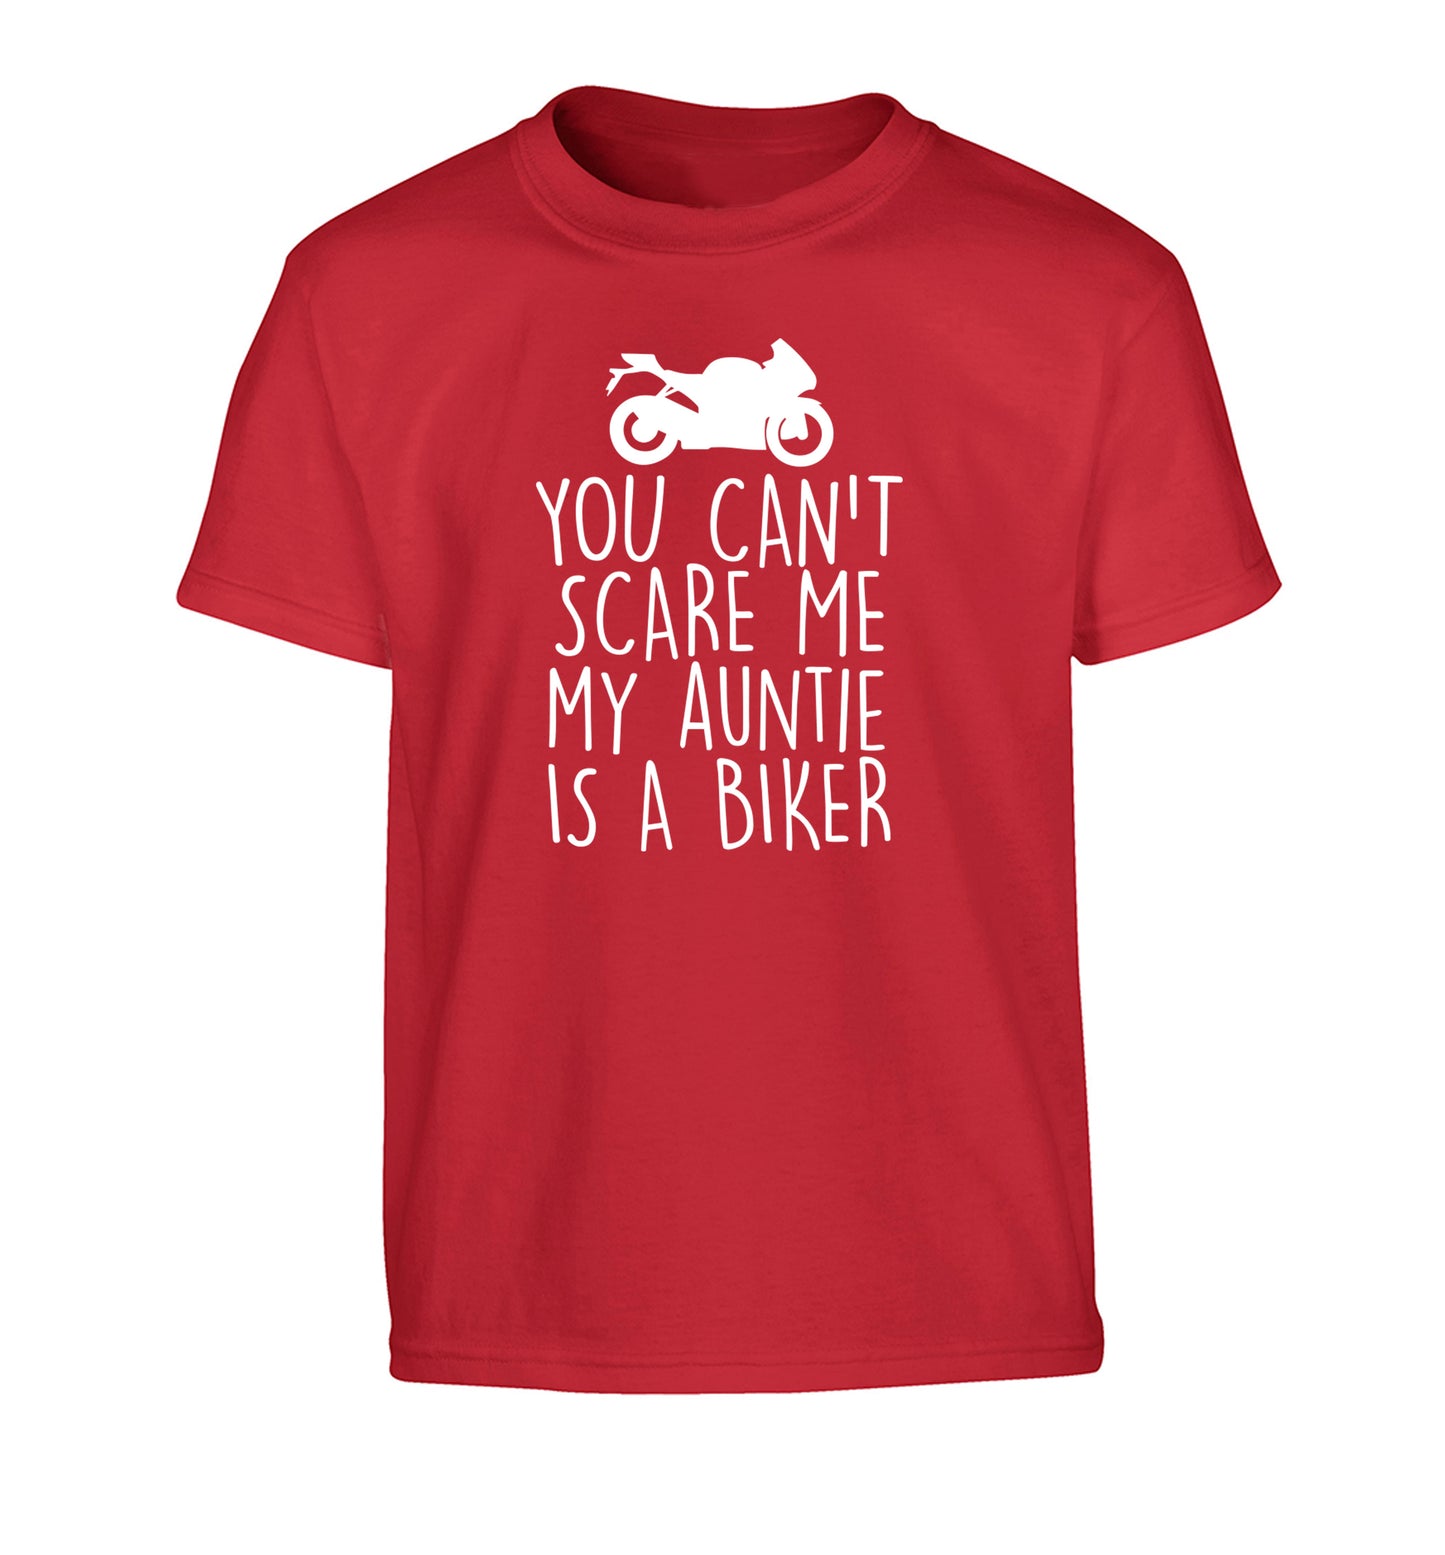 You can't scare me my auntie is a biker Children's red Tshirt 12-13 Years